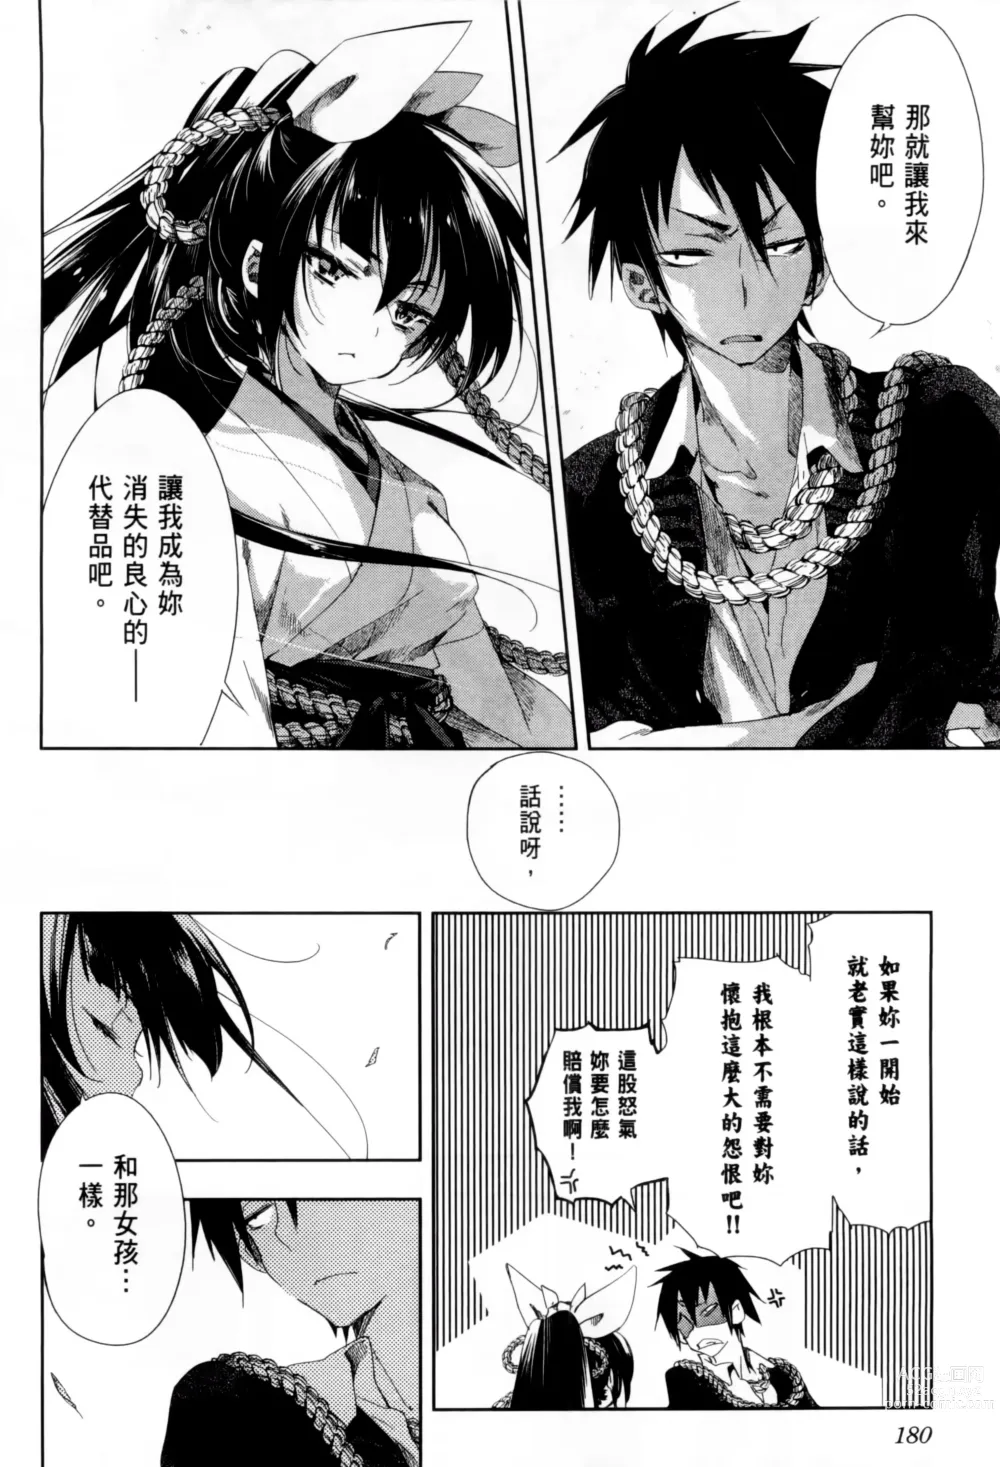 Page 185 of manga 神さまの怨結び 第1巻